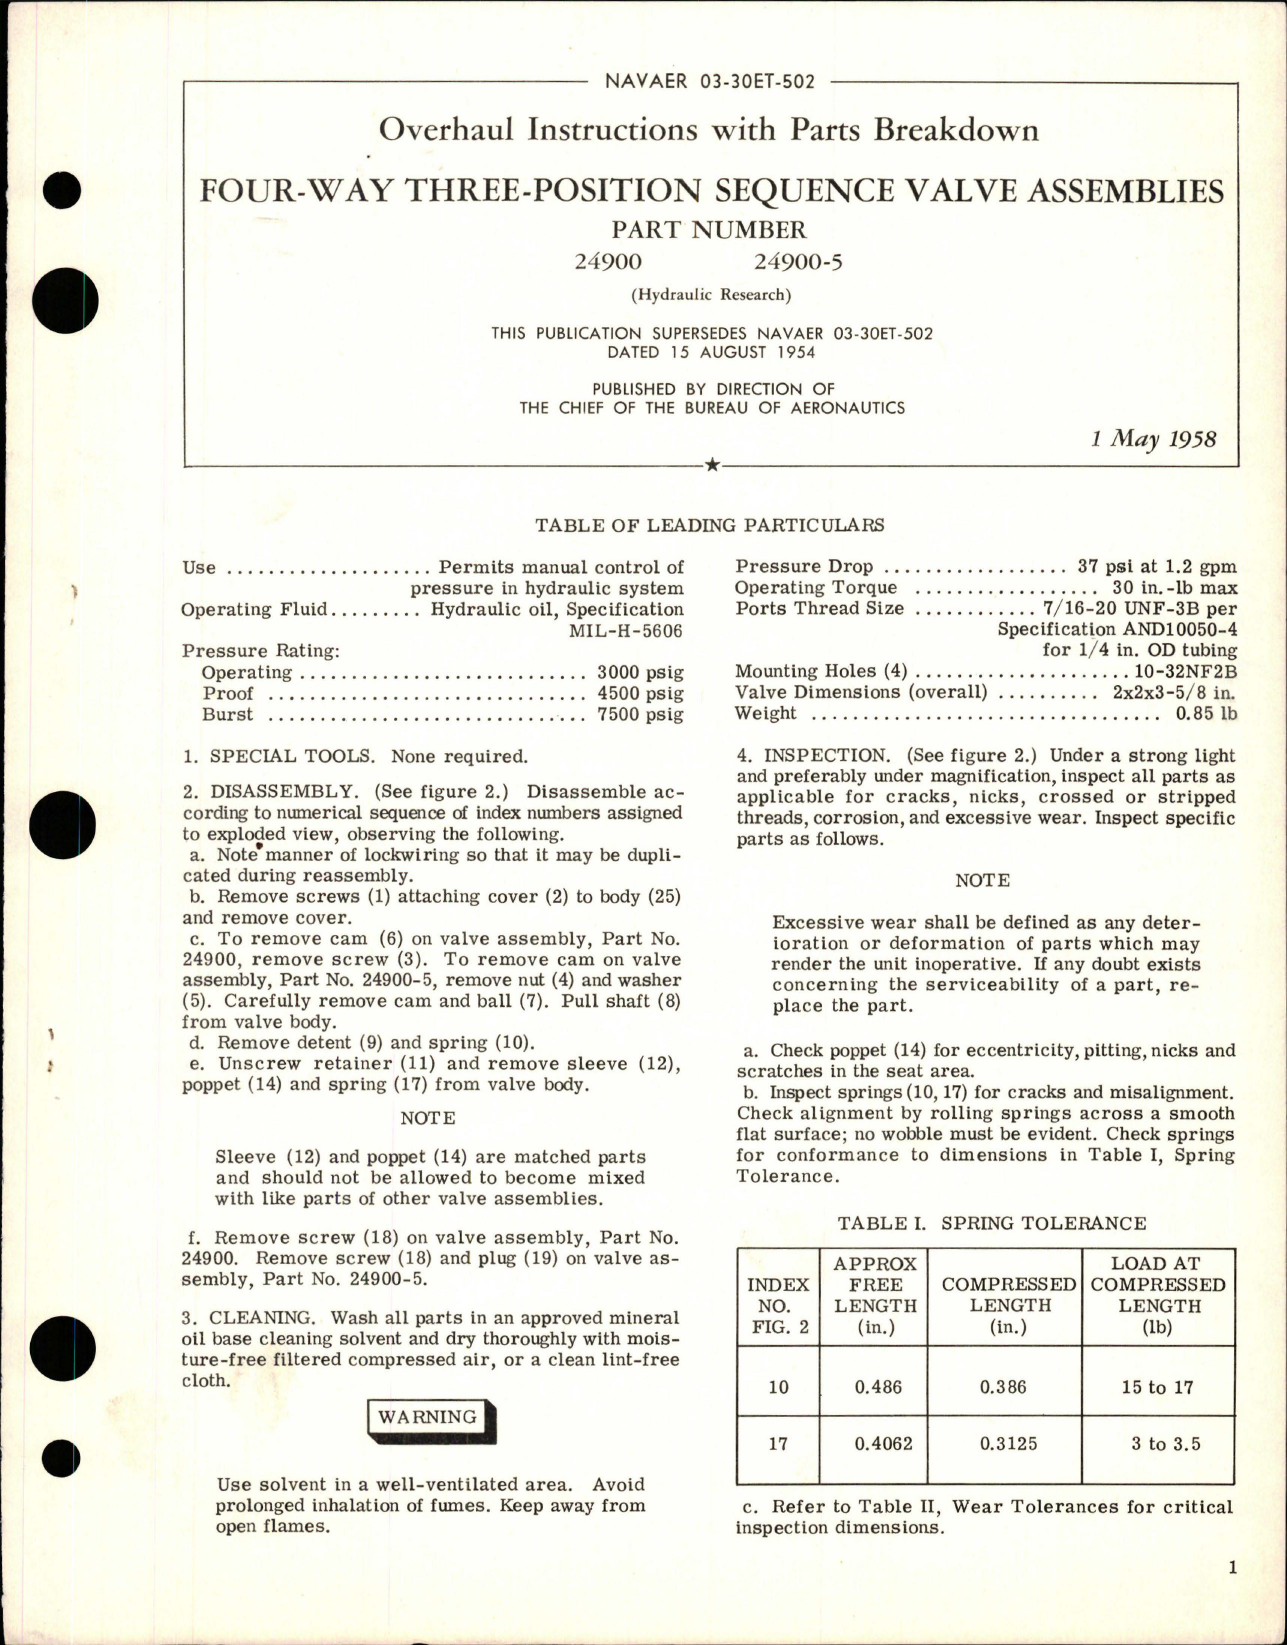 Sample page 1 from AirCorps Library document: Overhaul Instructions with Parts Breakdown for Four-Way Three-Position Sequence Valve Assemblies - Parts 24900, 24900-5 